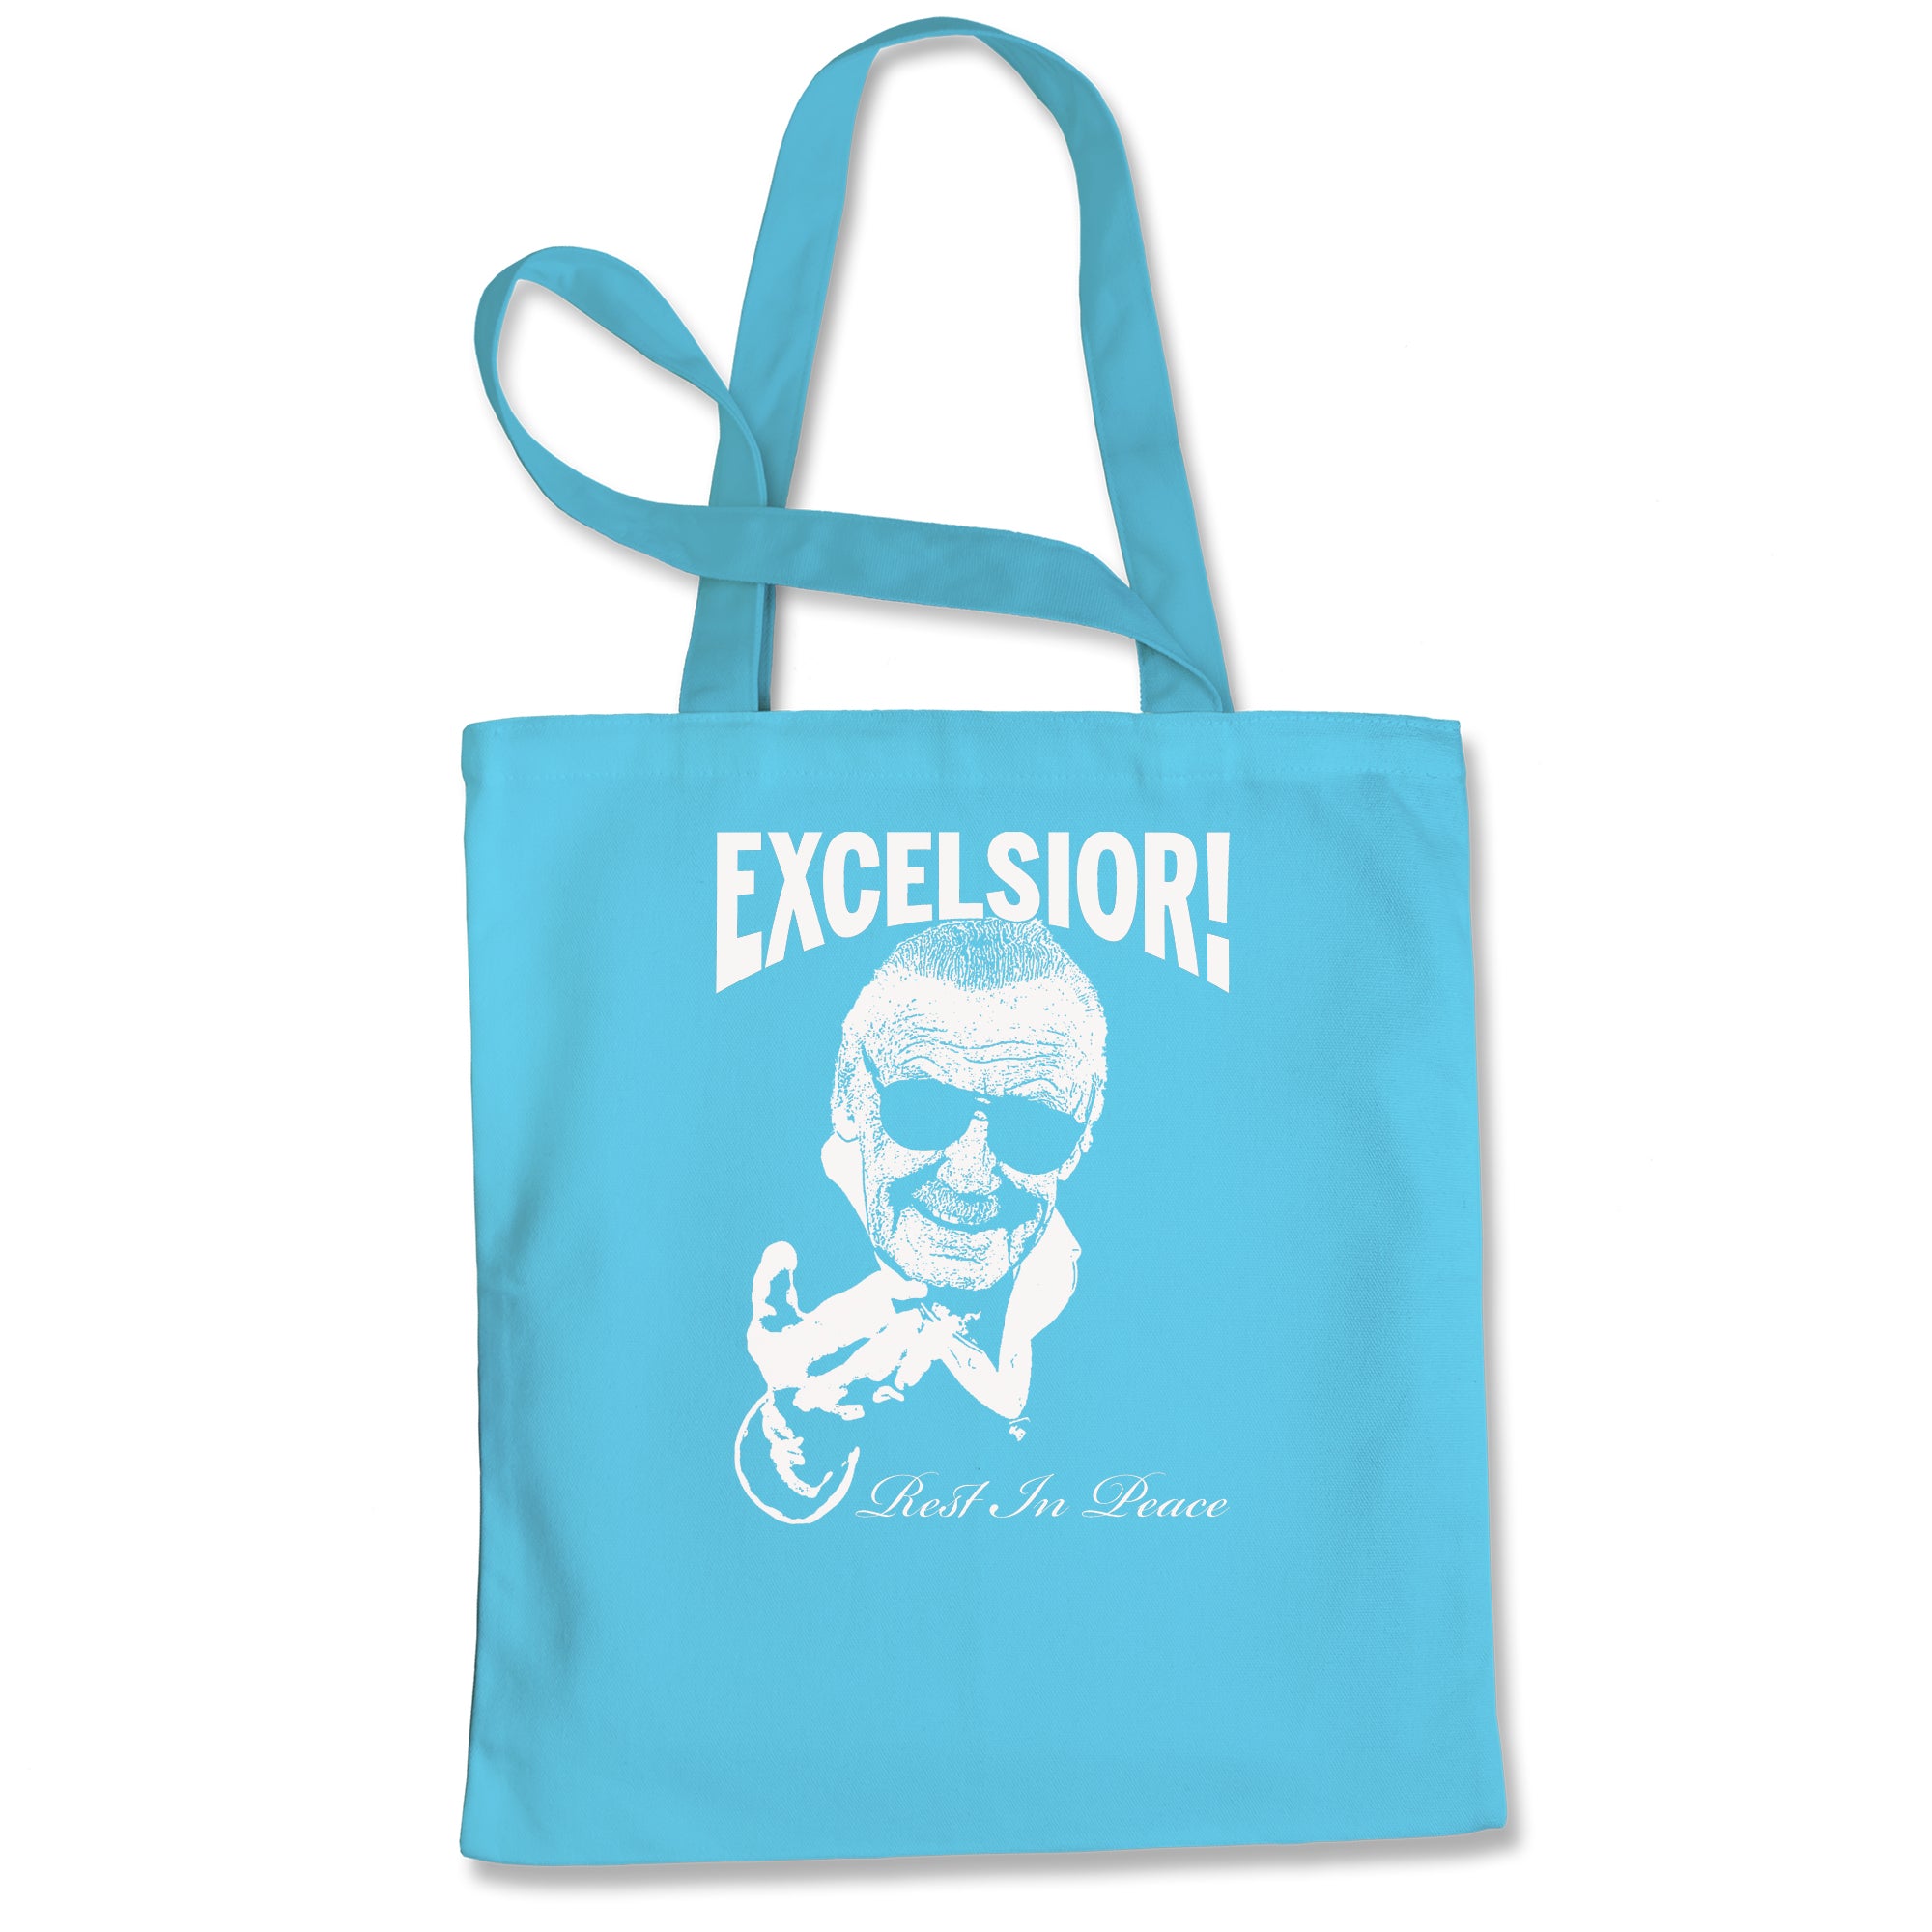 Stan Excelsior Rest In Peace RIP Lee Tote Bag